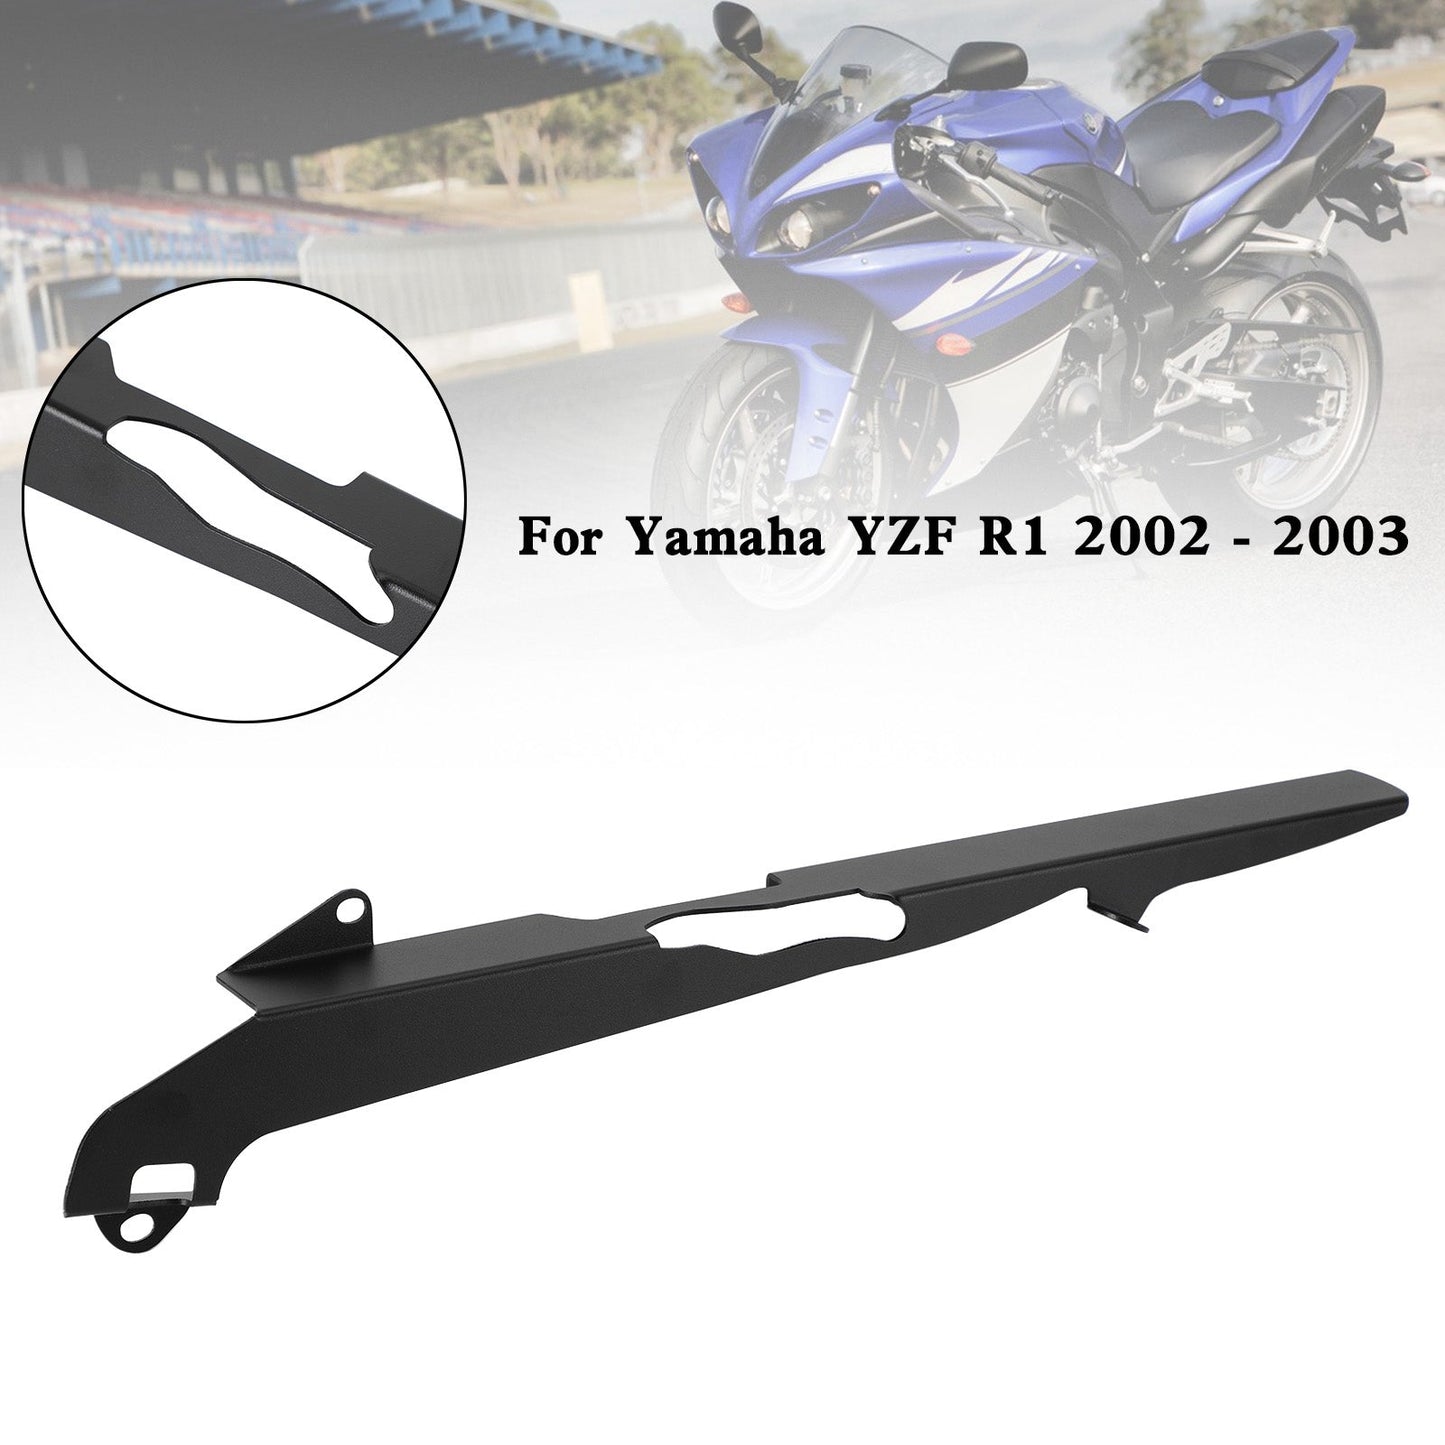 Rear Sprocket Chain Guard Protector Cover For Yamaha YZF R1 2002 2003